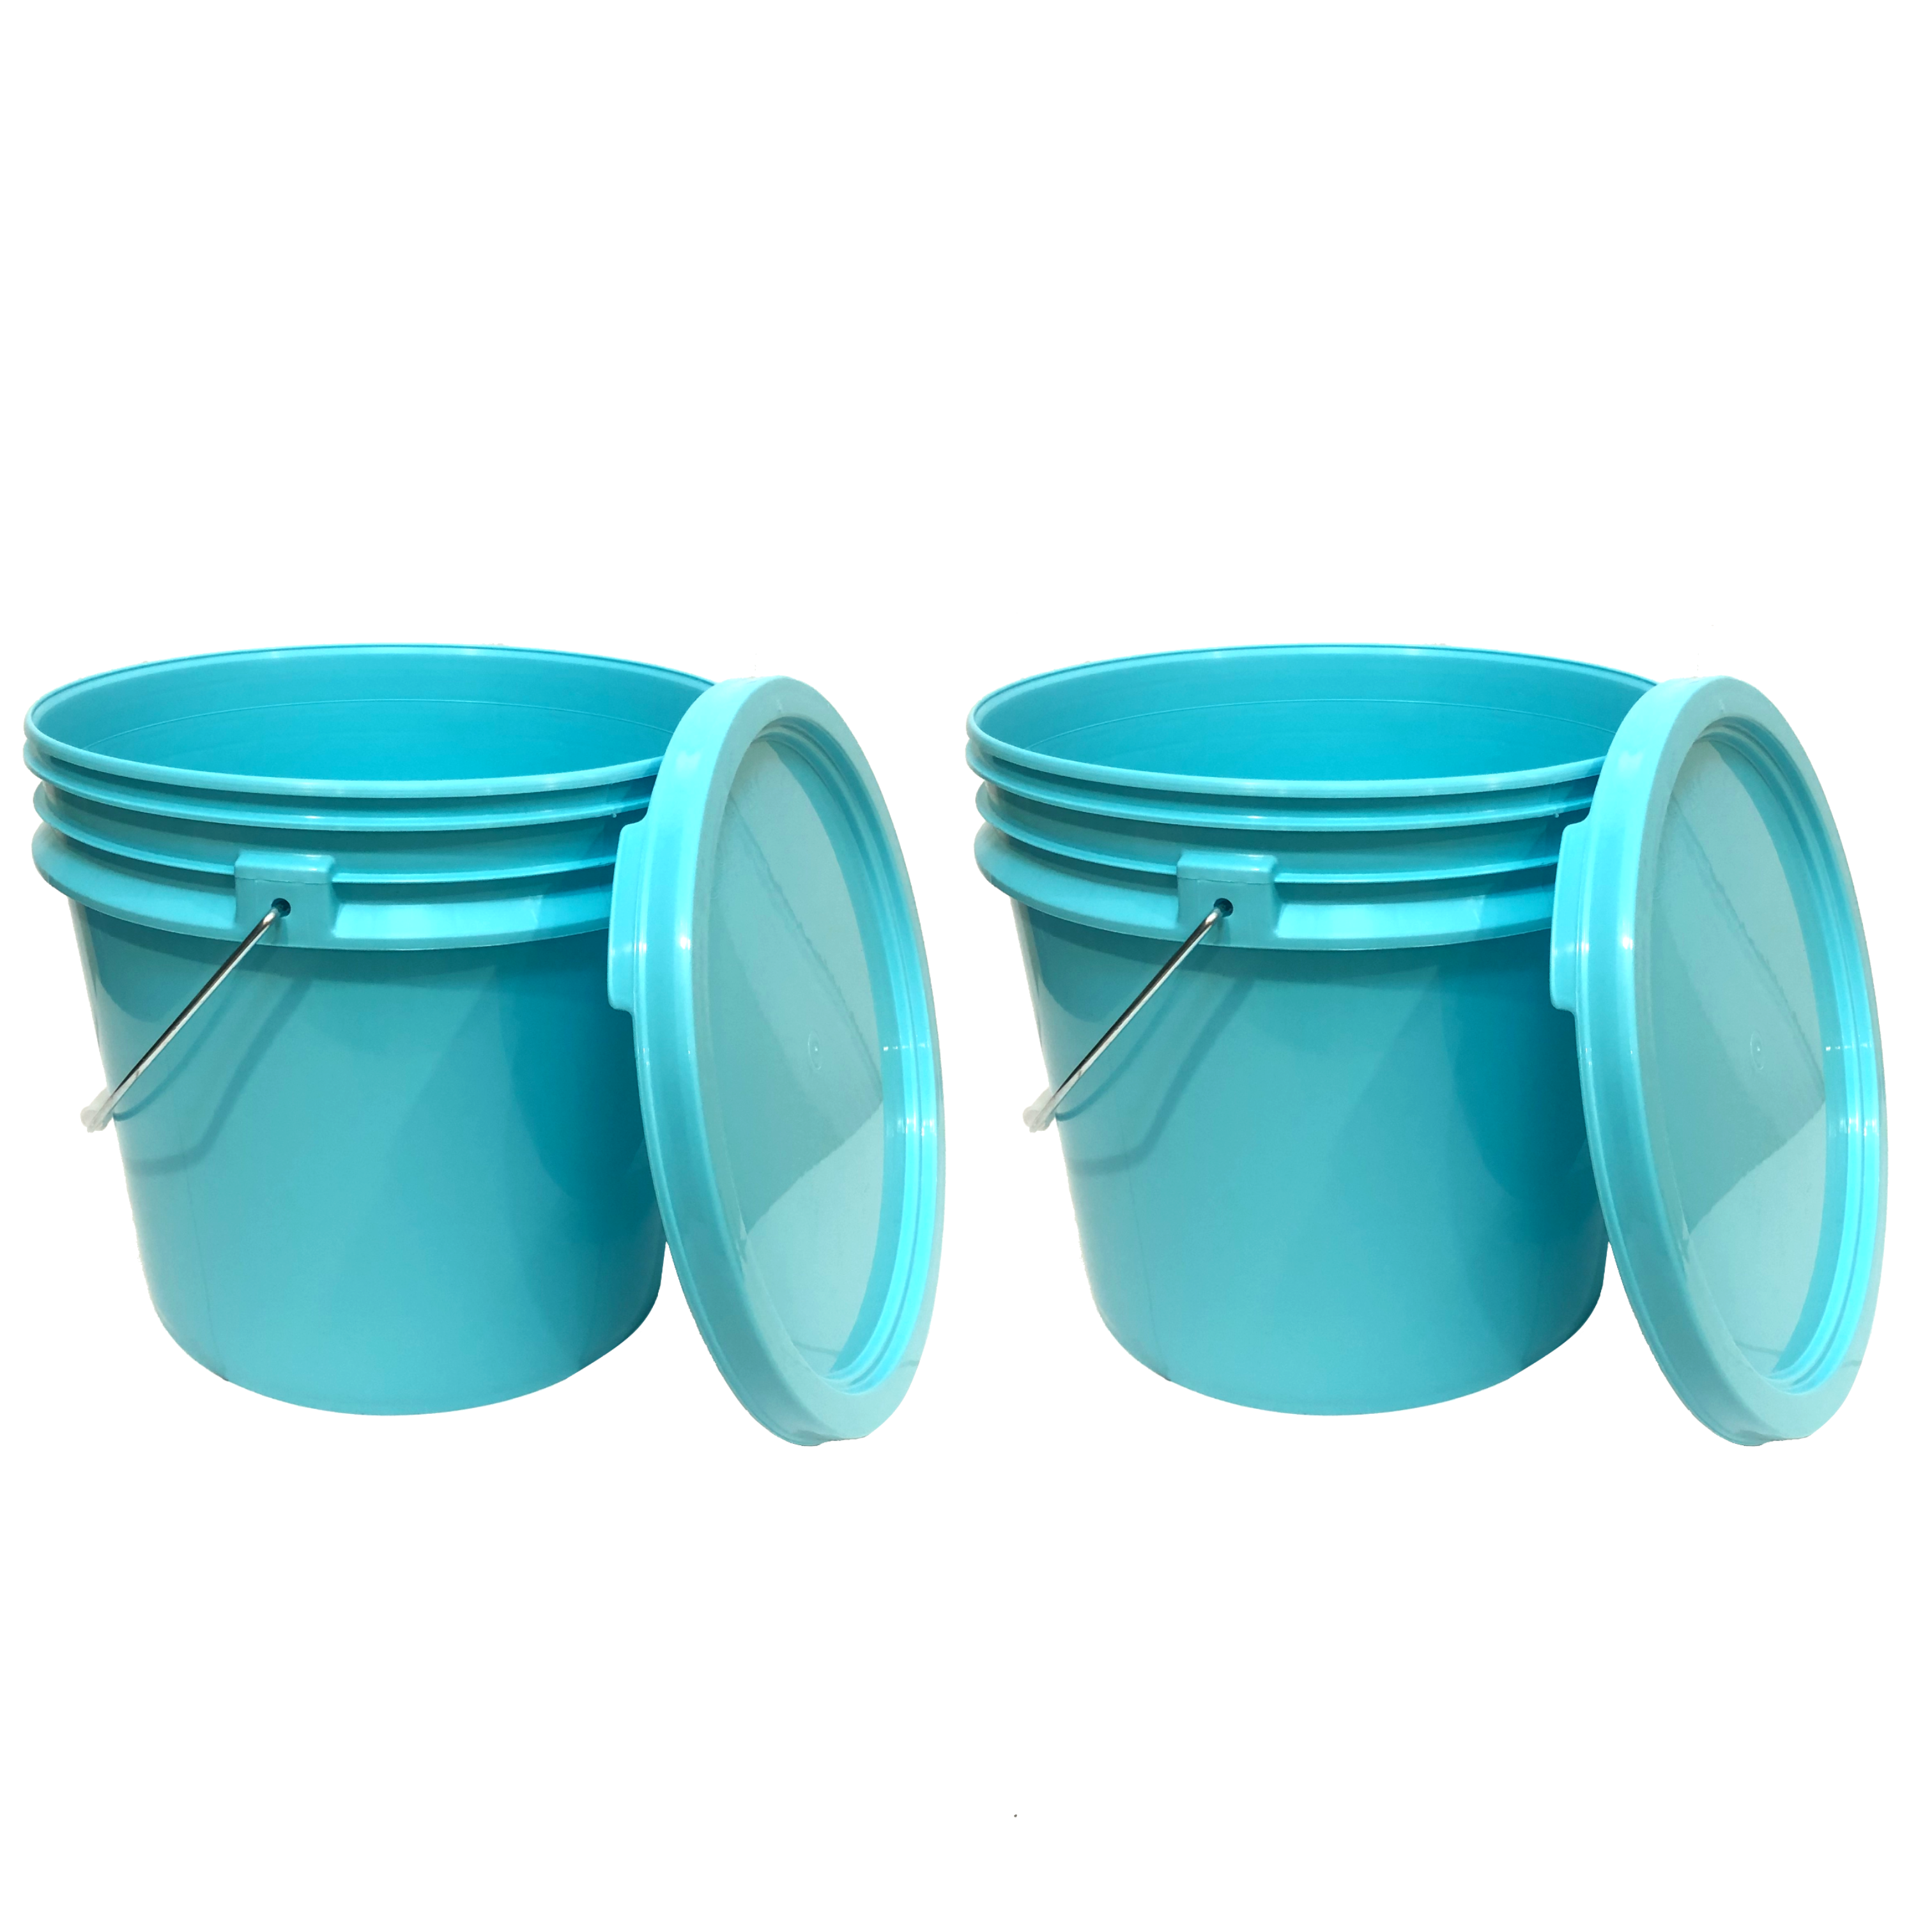 Outdoor 3.5 Gallon Bucket with Lid - Durable All Purpose Pail (Aqua, 5)